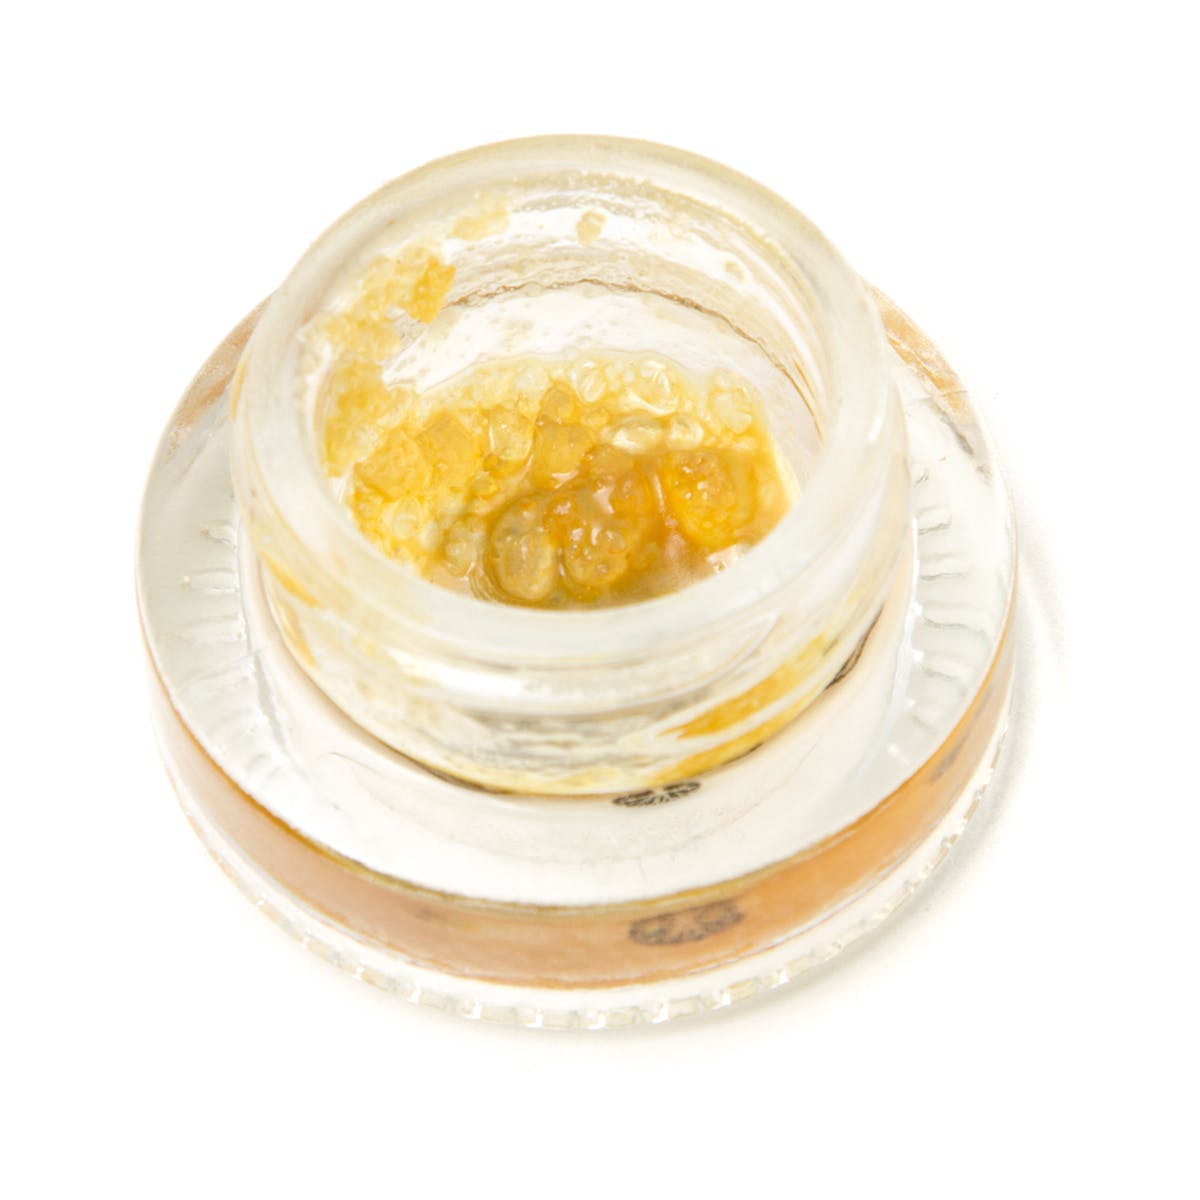 concentrate-treetop-labs-gg-234-live-resin-hcfse